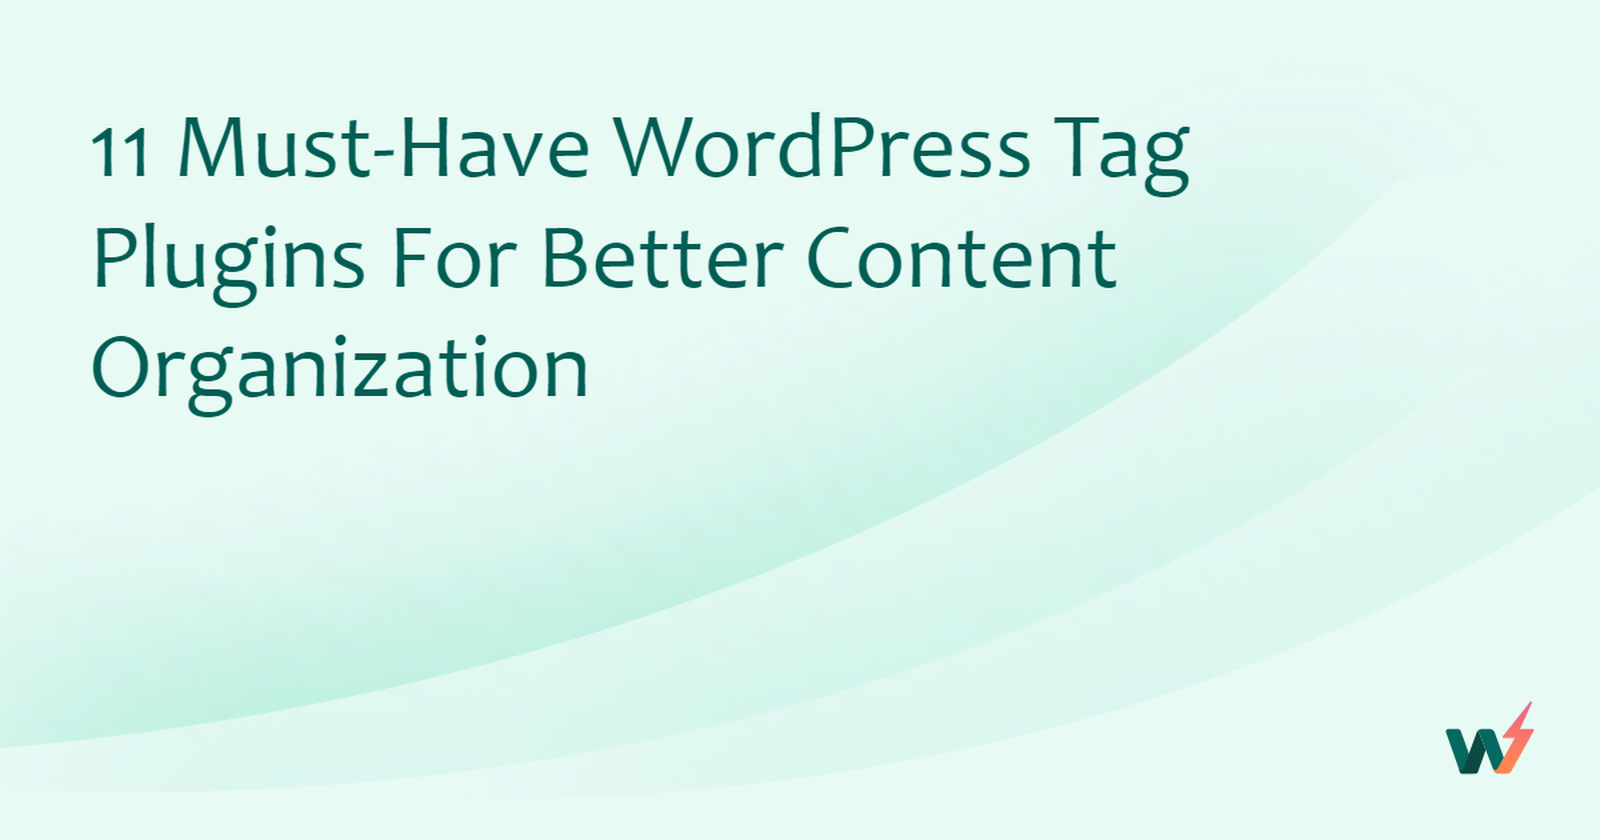 11 Must-Have WordPress Tag Plugins For Better Content Organization